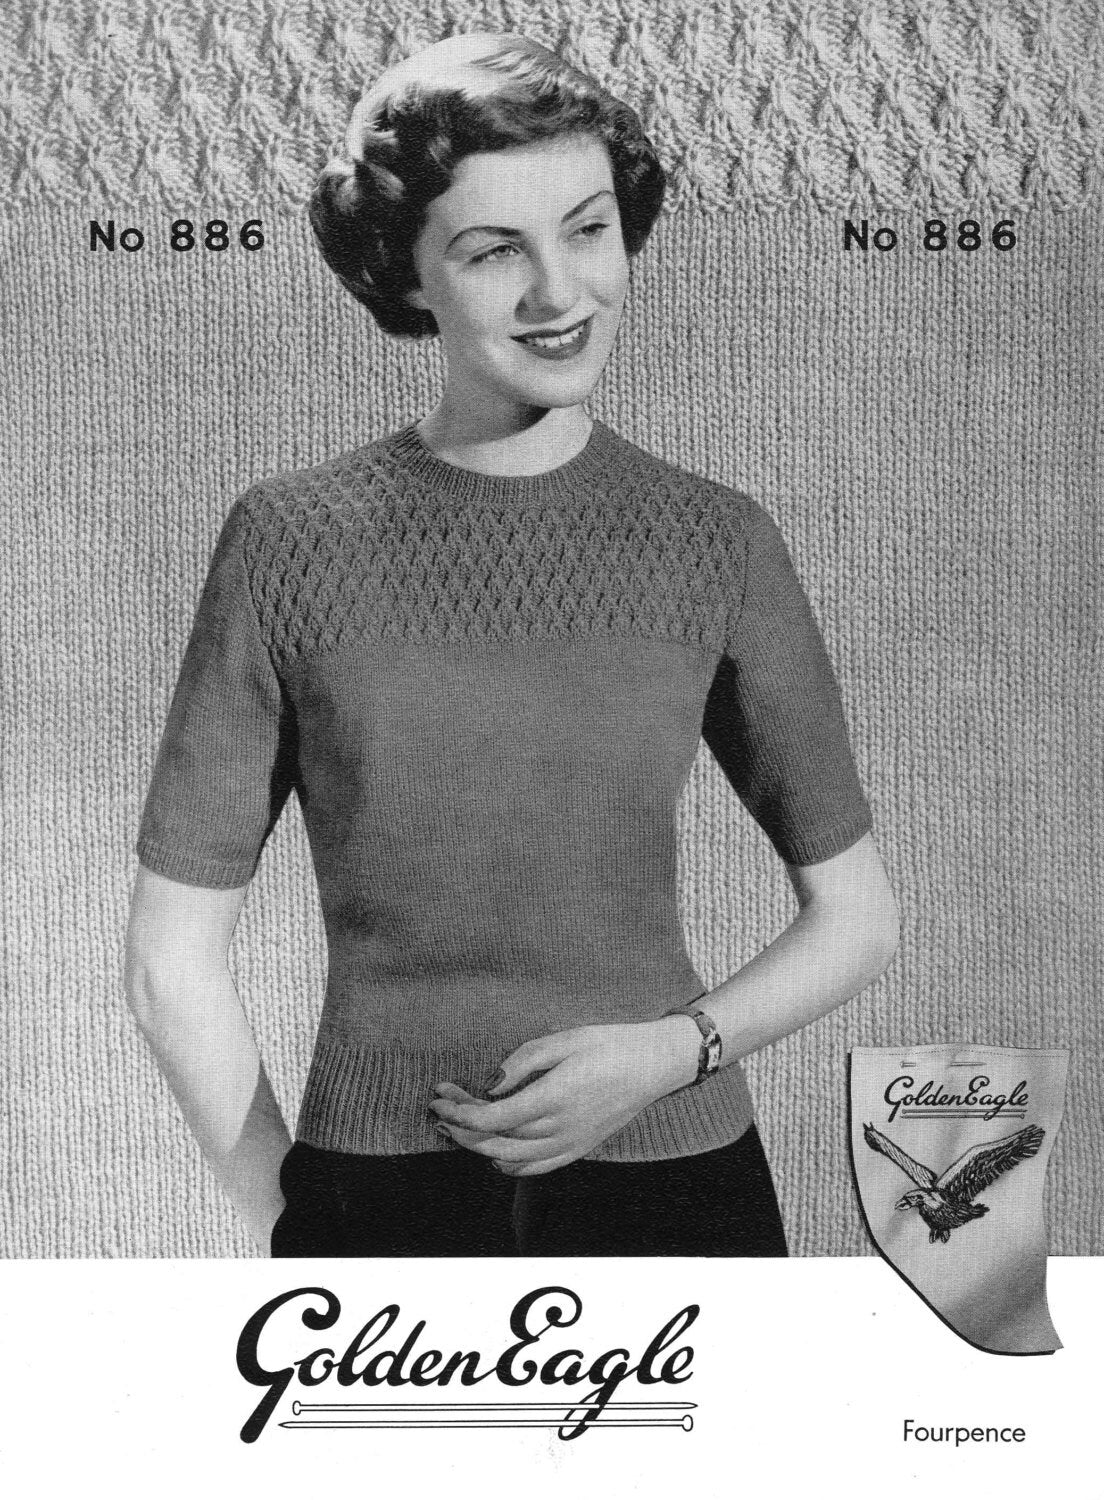 Ladies Classic Jumper, 34" Bust, 3ply, 40s Knitting Pattern, Golden Eagle 886